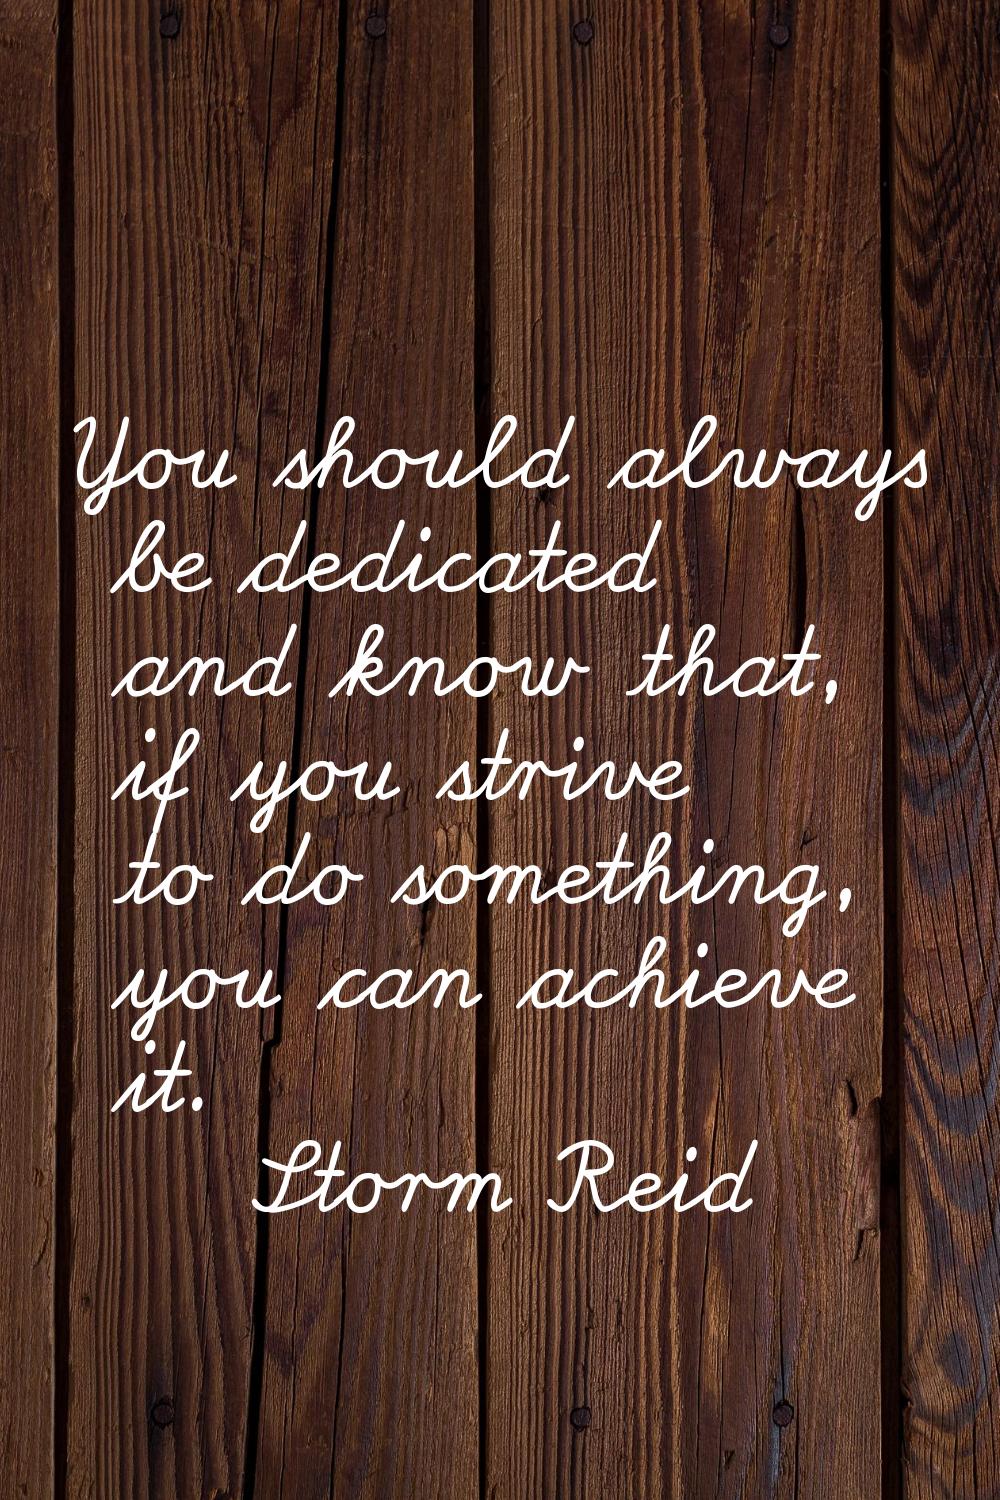 You should always be dedicated and know that, if you strive to do something, you can achieve it.